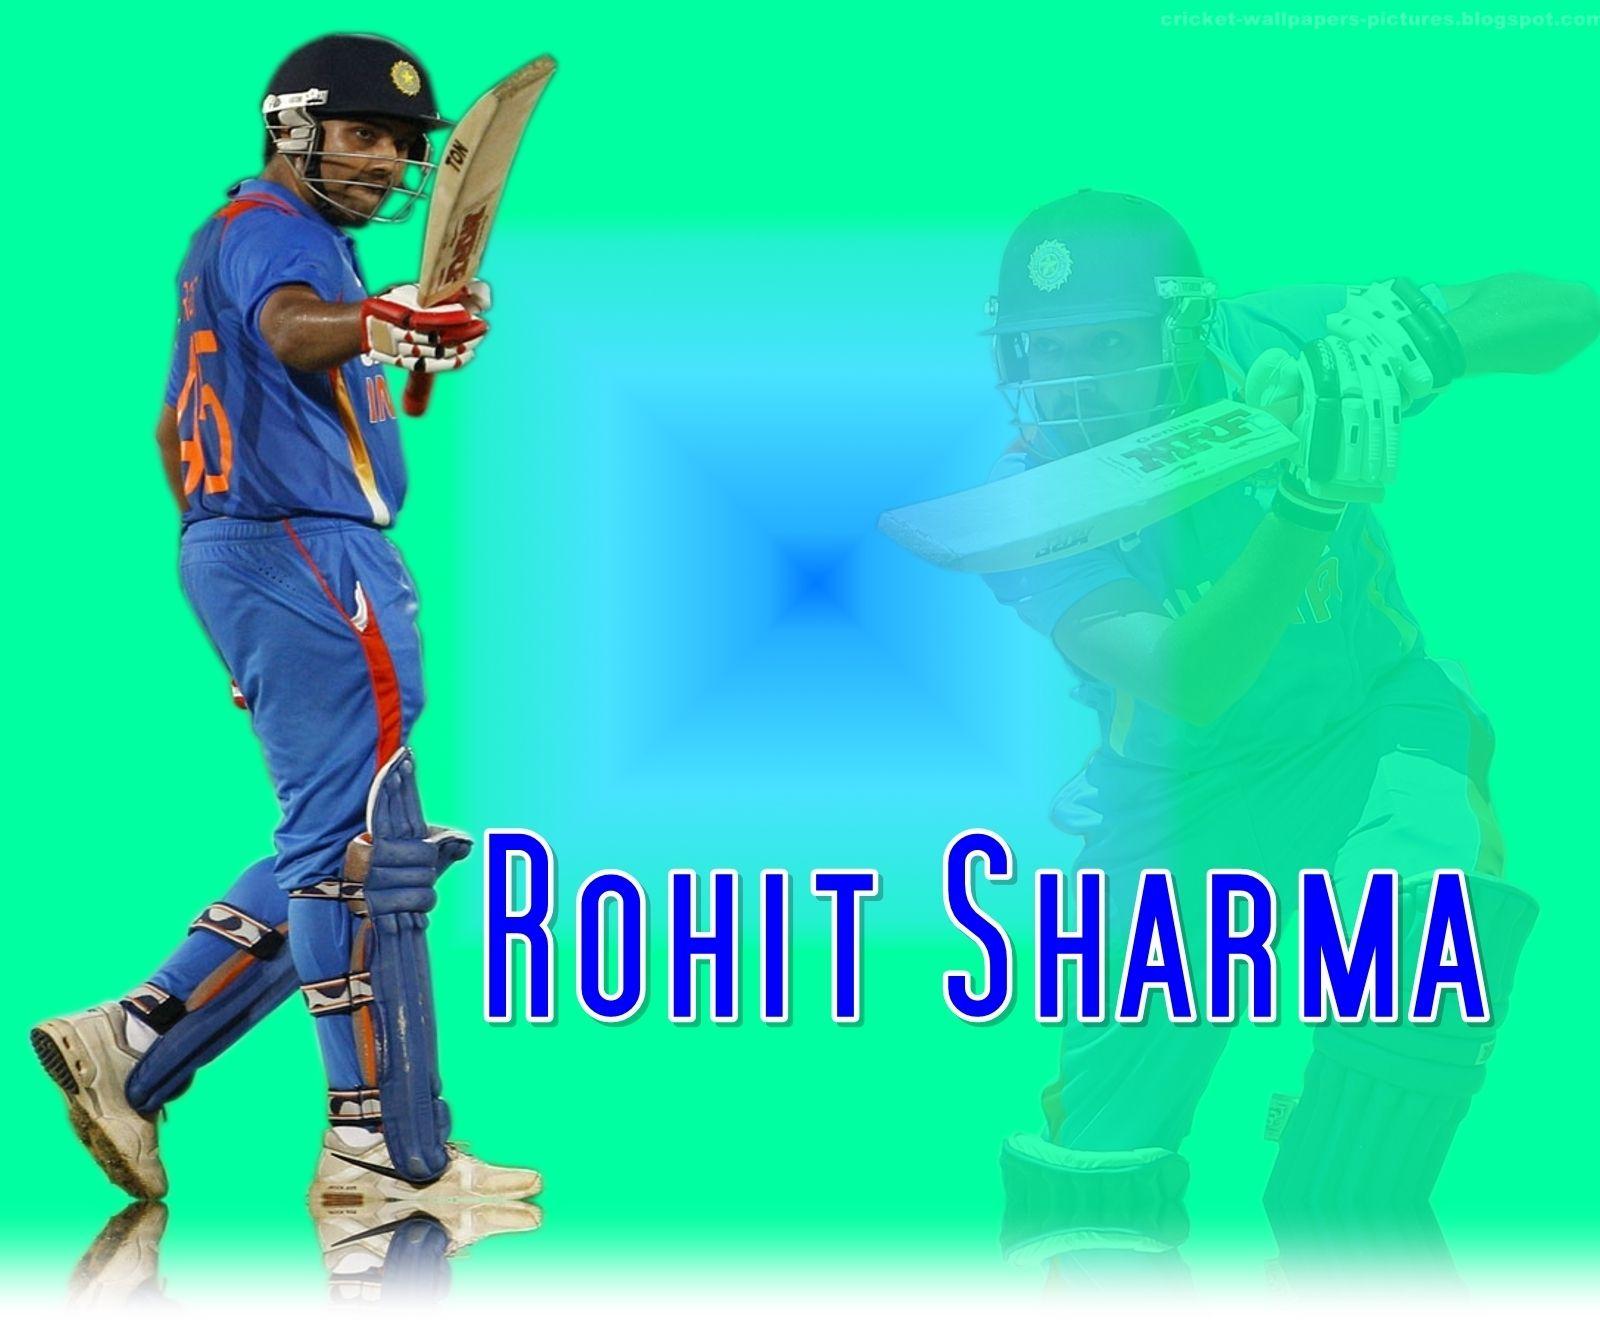 Rohit Sharma Wallpapers - Wallpaper Cave